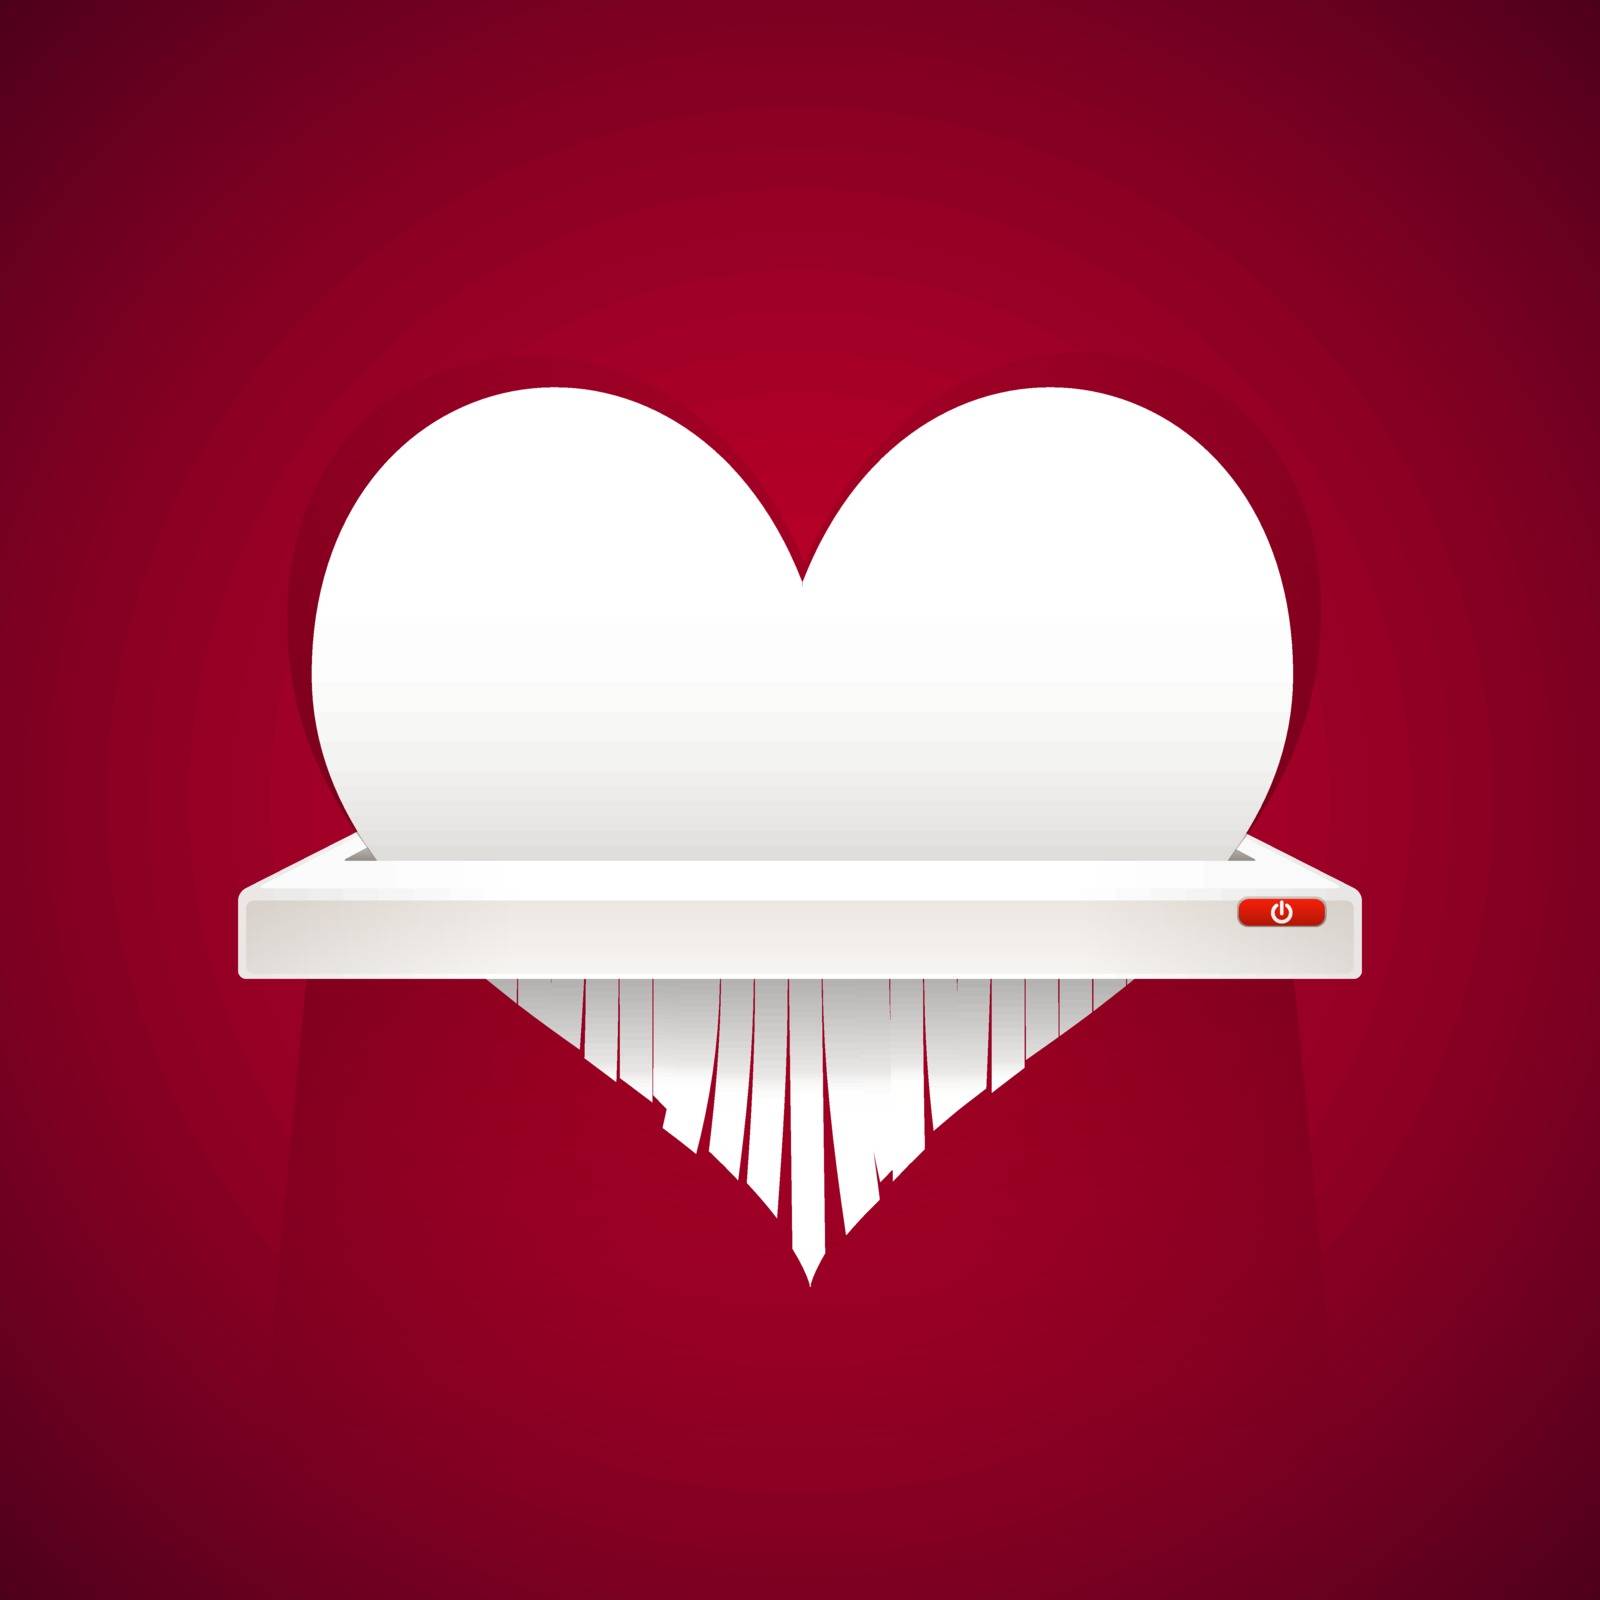 Paper Heart is Cut into Shredder. Clipping paths included in additional jpg format.